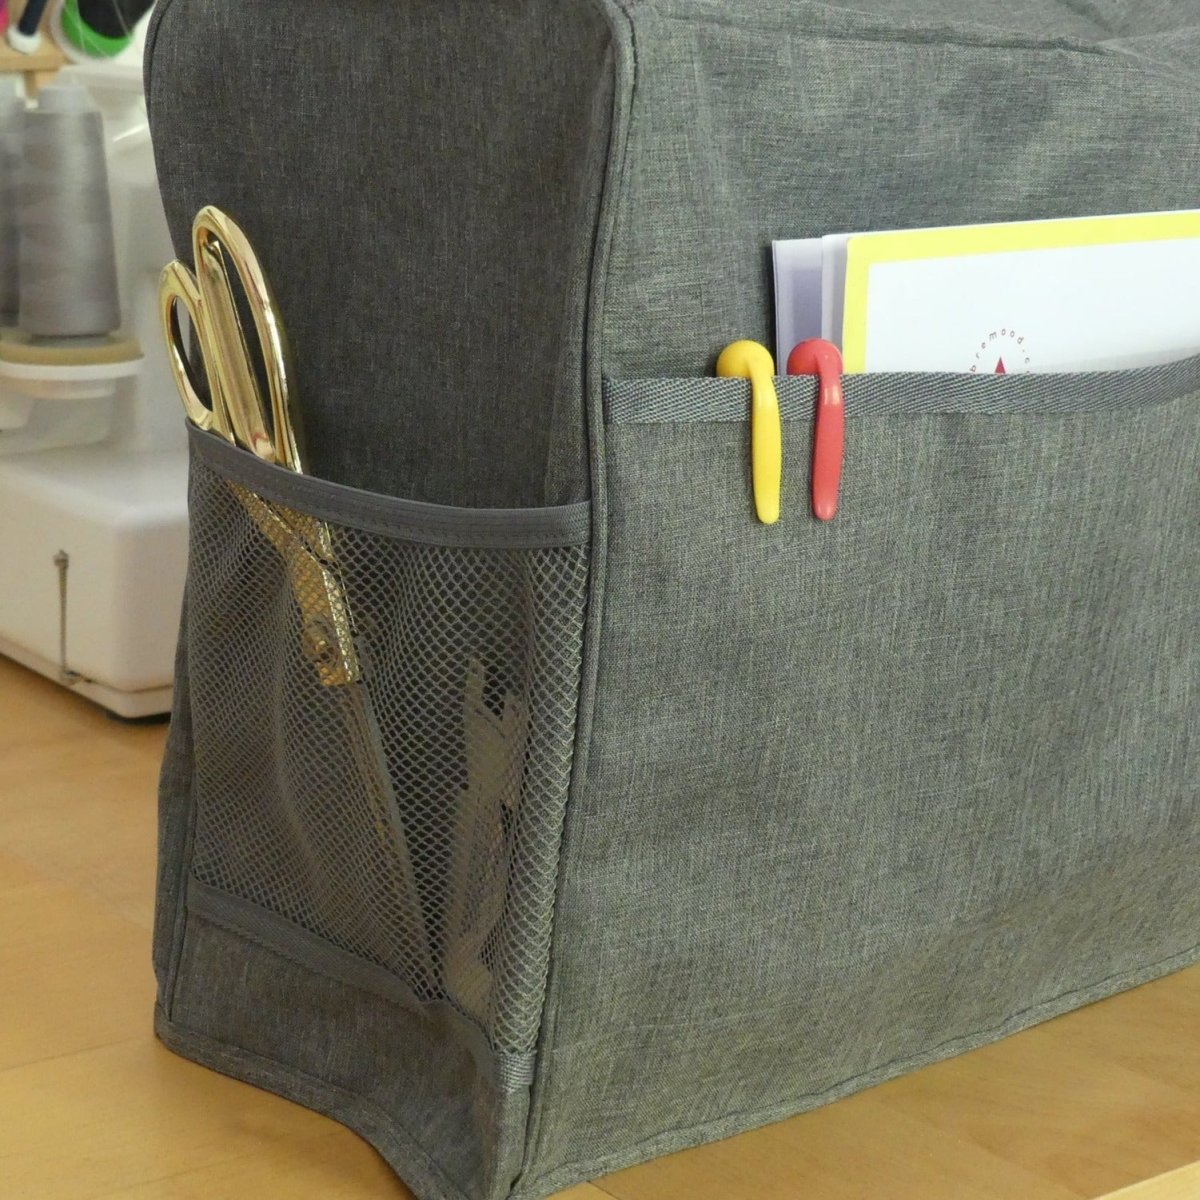 A grey sewing machine cover that protects a sewing machine from dust with side pockets